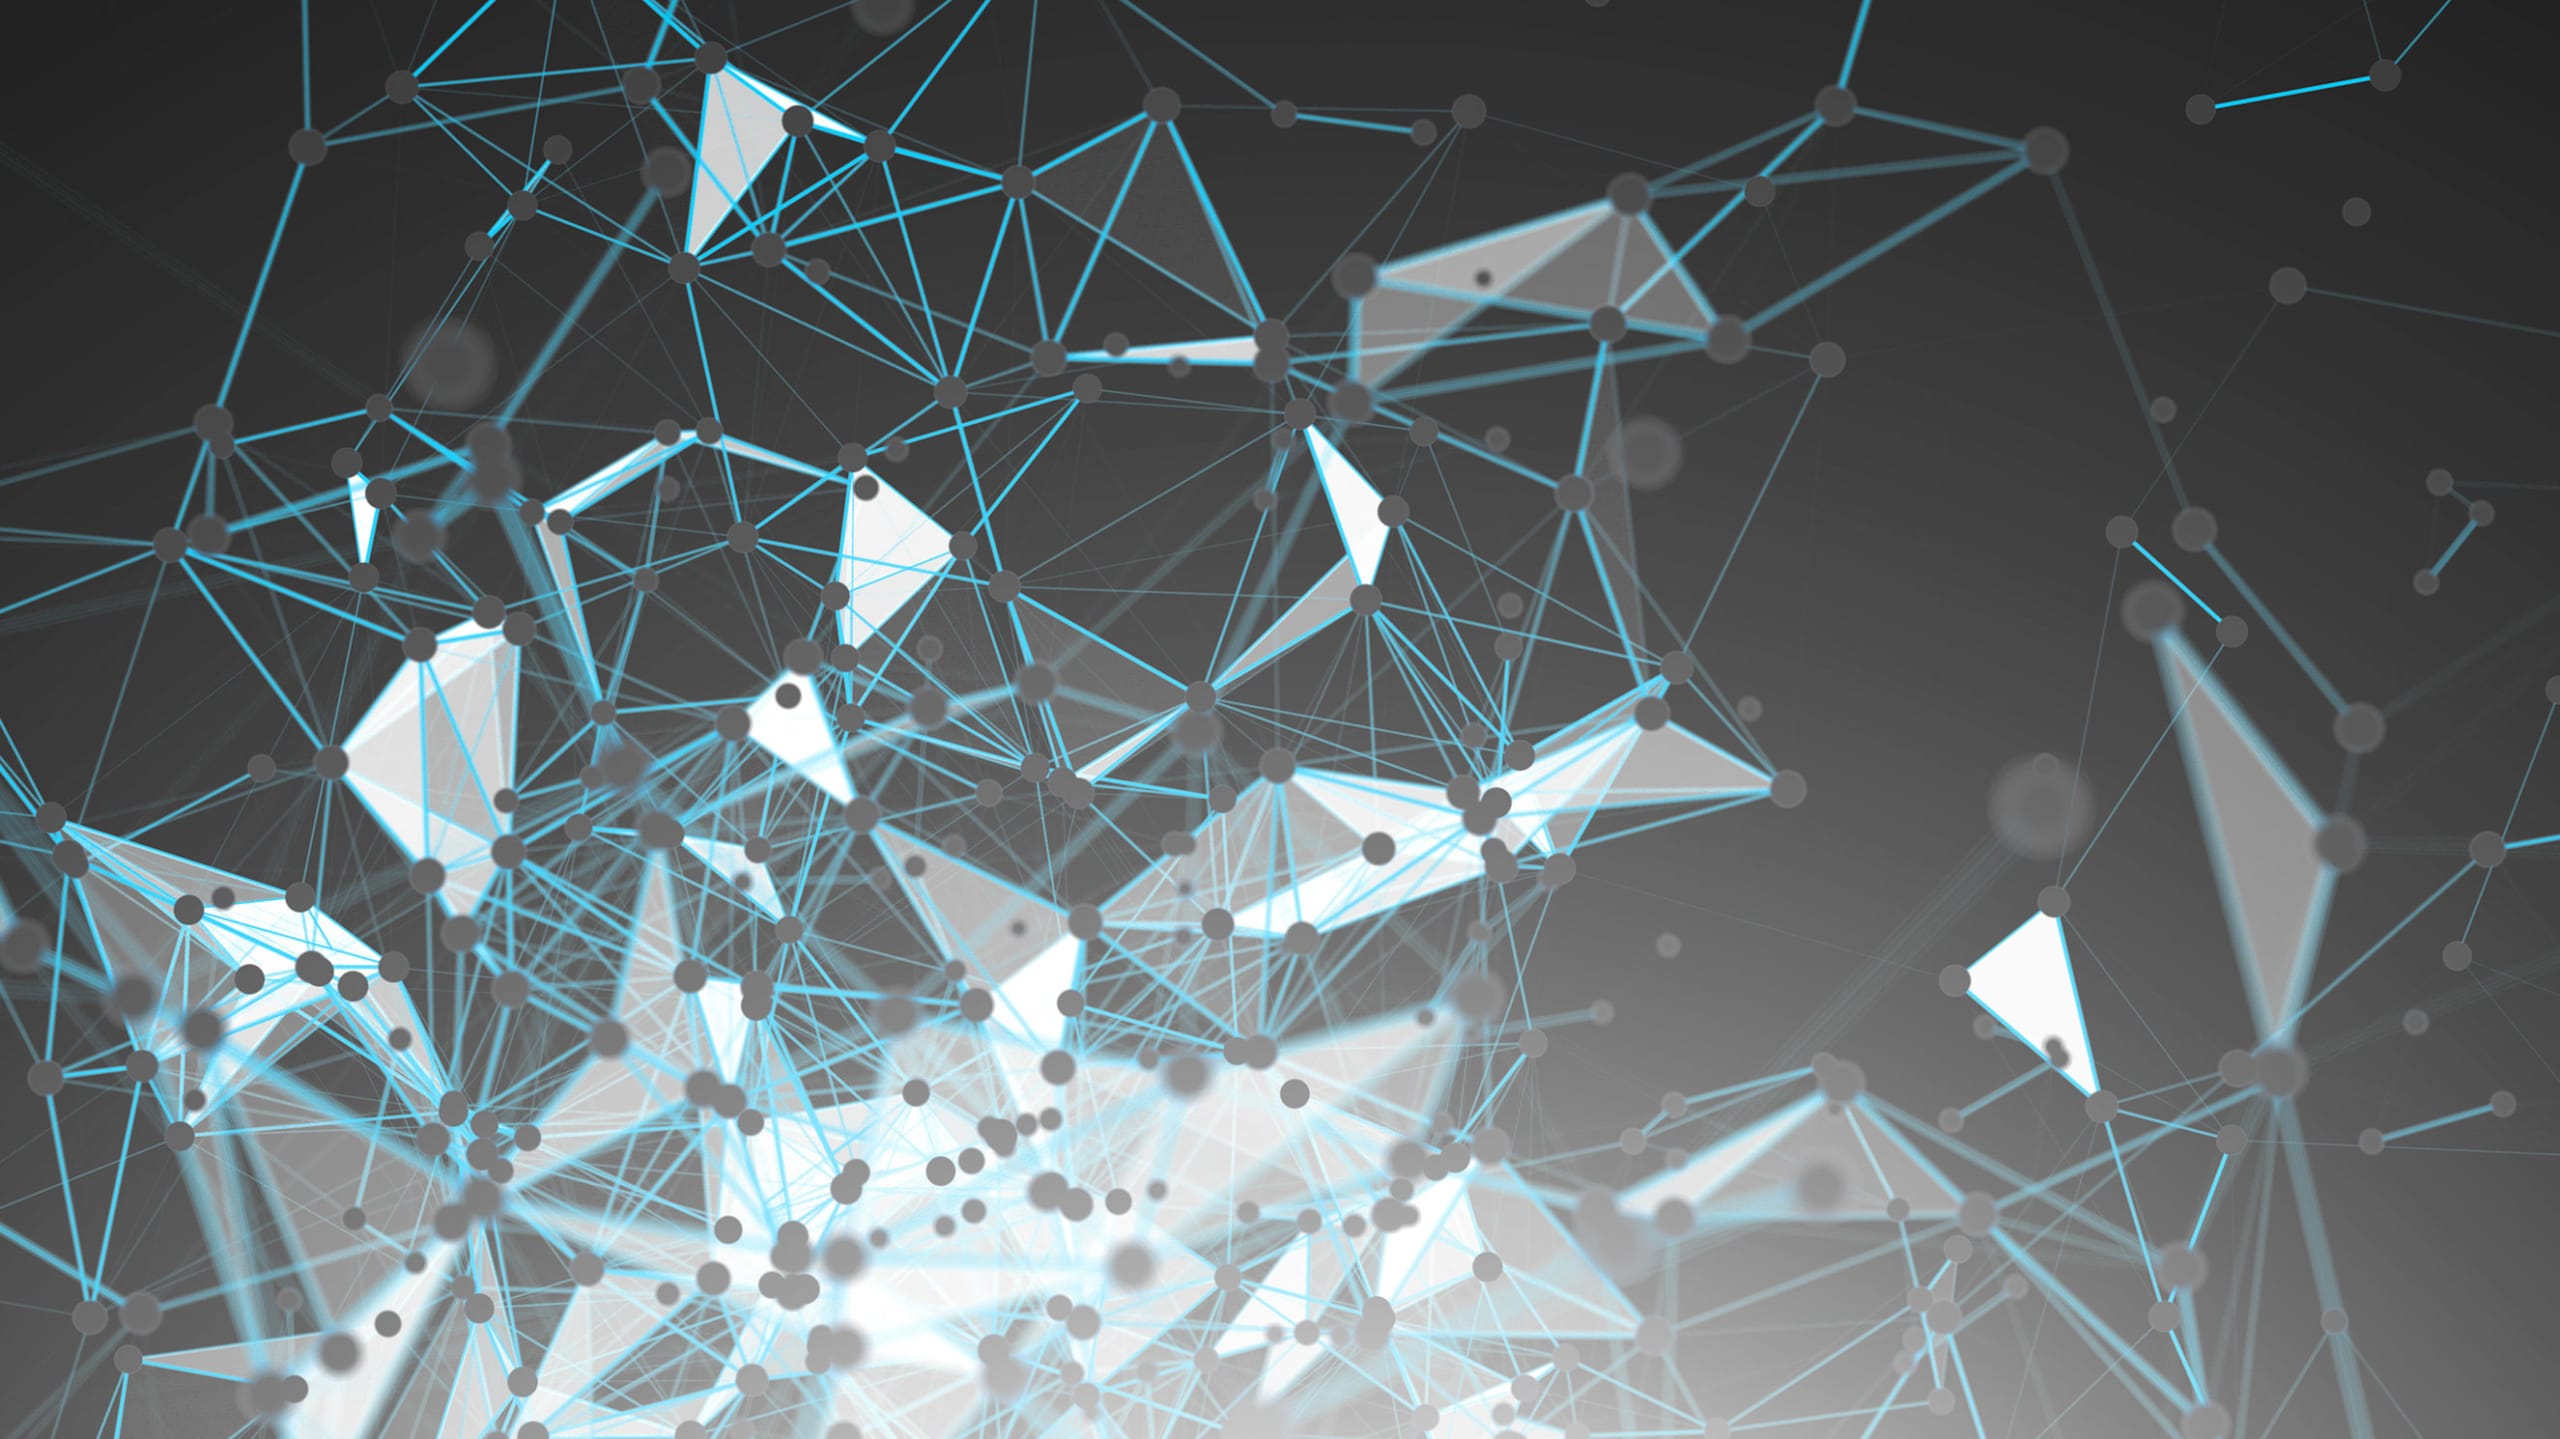 A digital graphic featuring a network of connected lines and dots, forming a complex mesh, with a gradient from white to dark grey background.